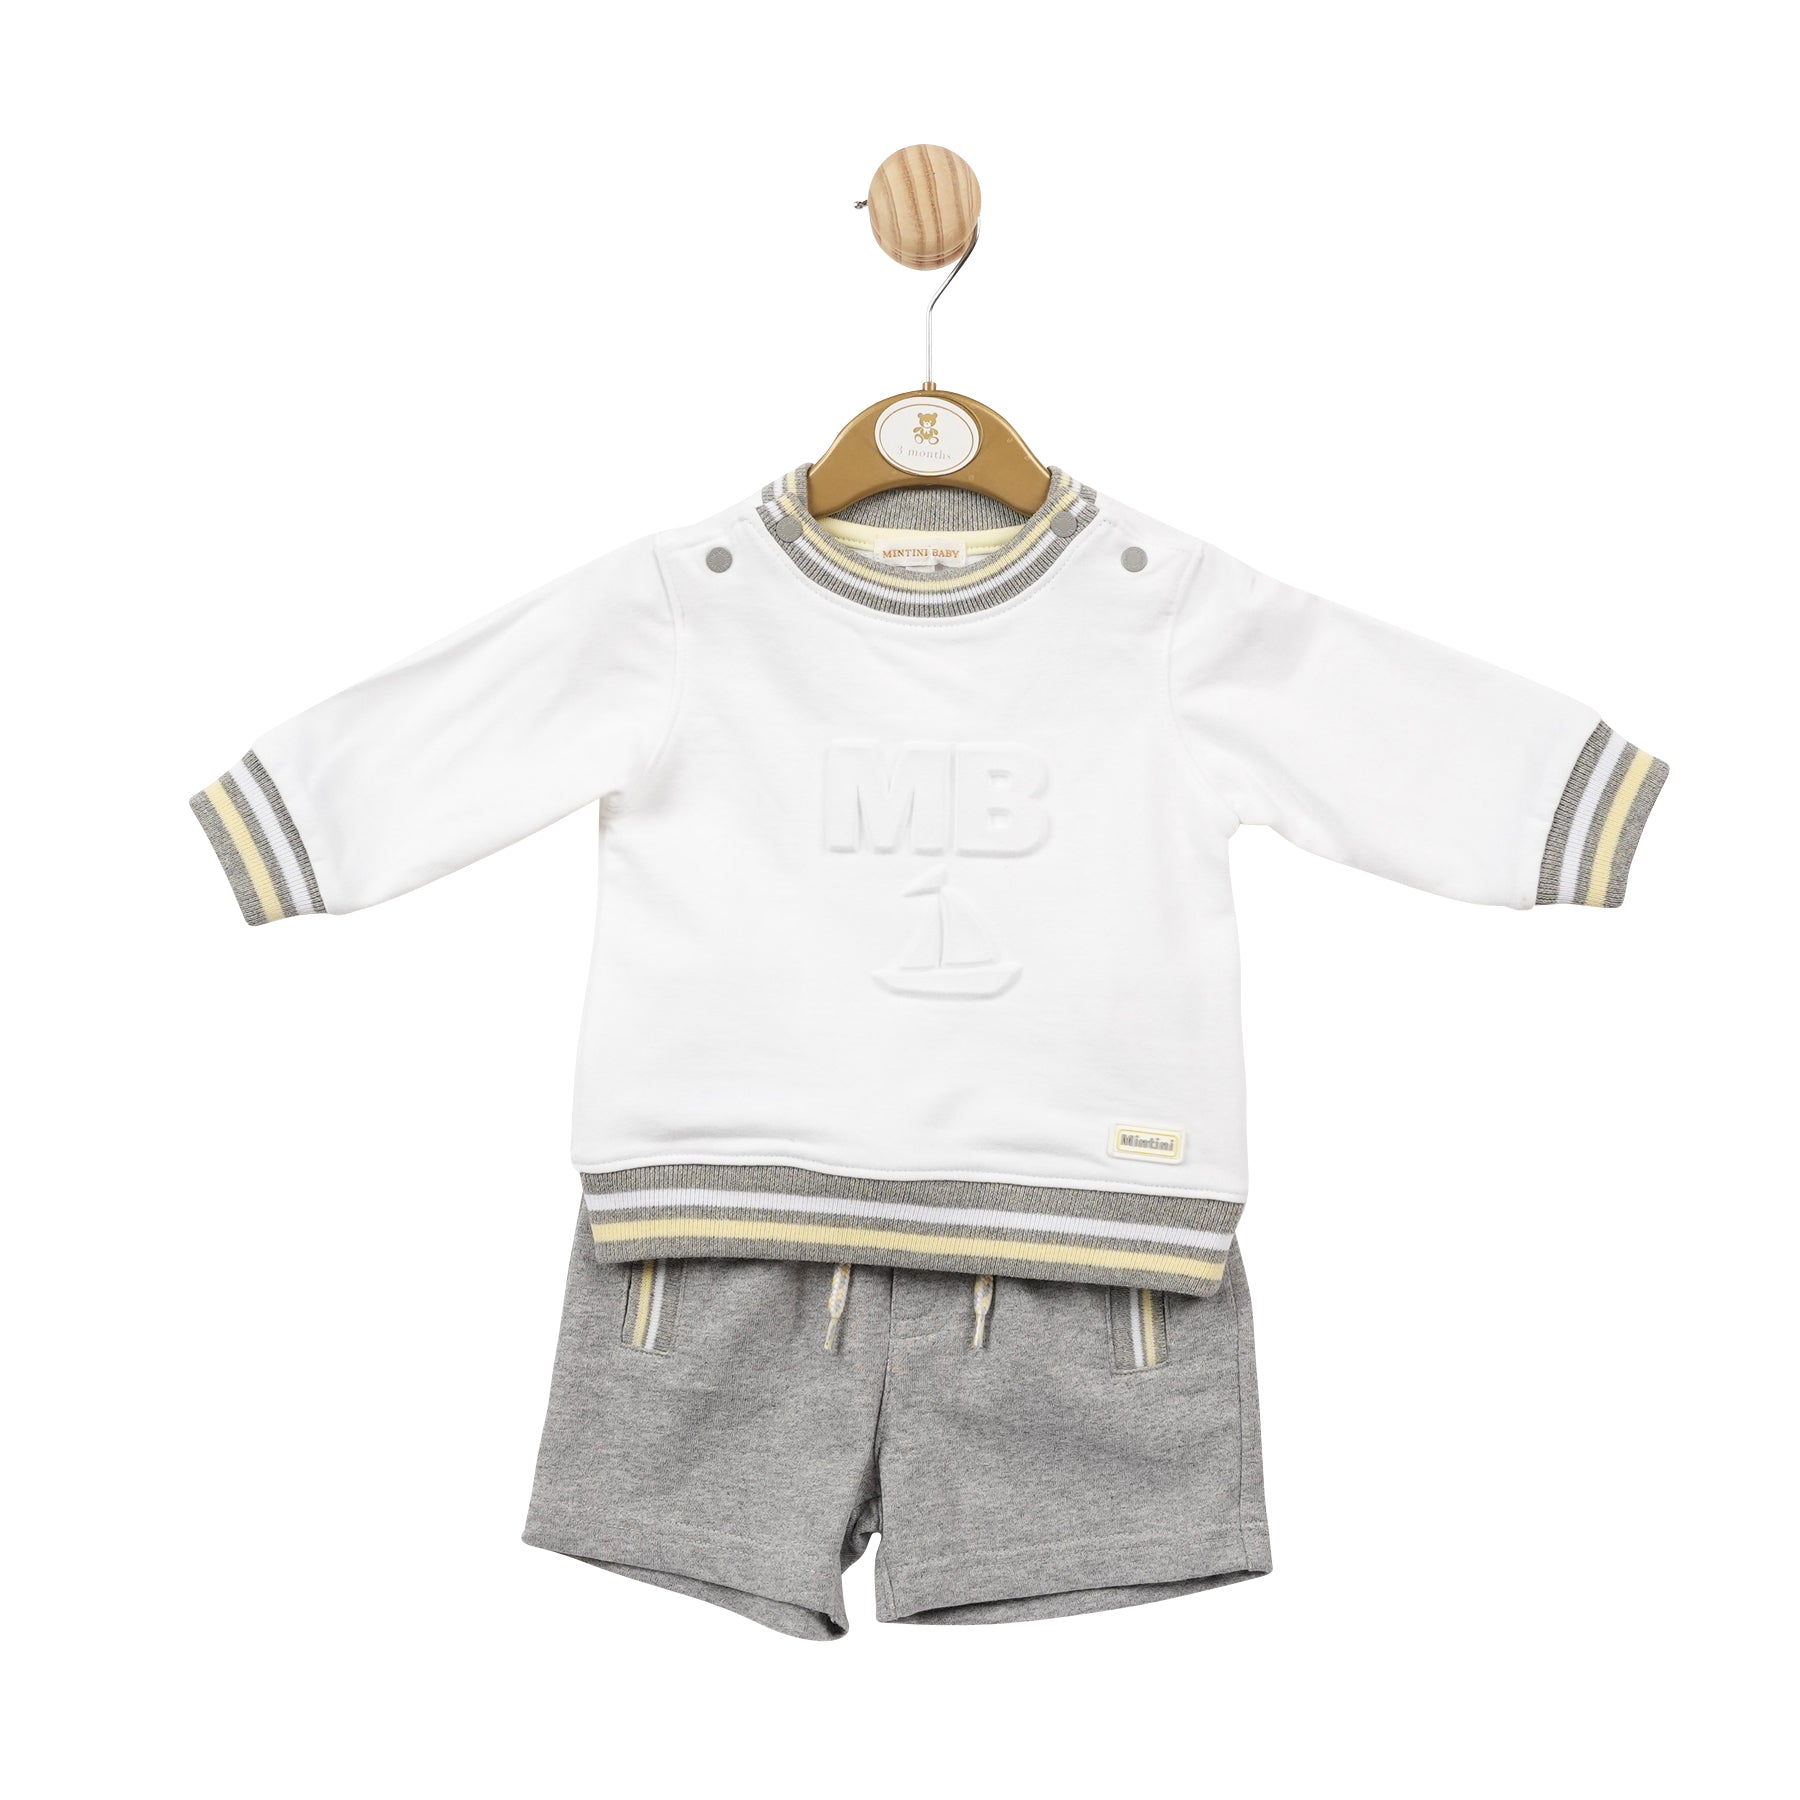 <p>This boys two piece set from Mintini Baby is perfect for the spring and summer season. The white sweatshirt features a stylish MB logo in the middle with grey and yellow piping detail, while the grey shorts have a pop of colour with yellow piping detail. Available in sizes 3 months up to 5 years old. Perfect if you want to match little brother with big brother.</p>